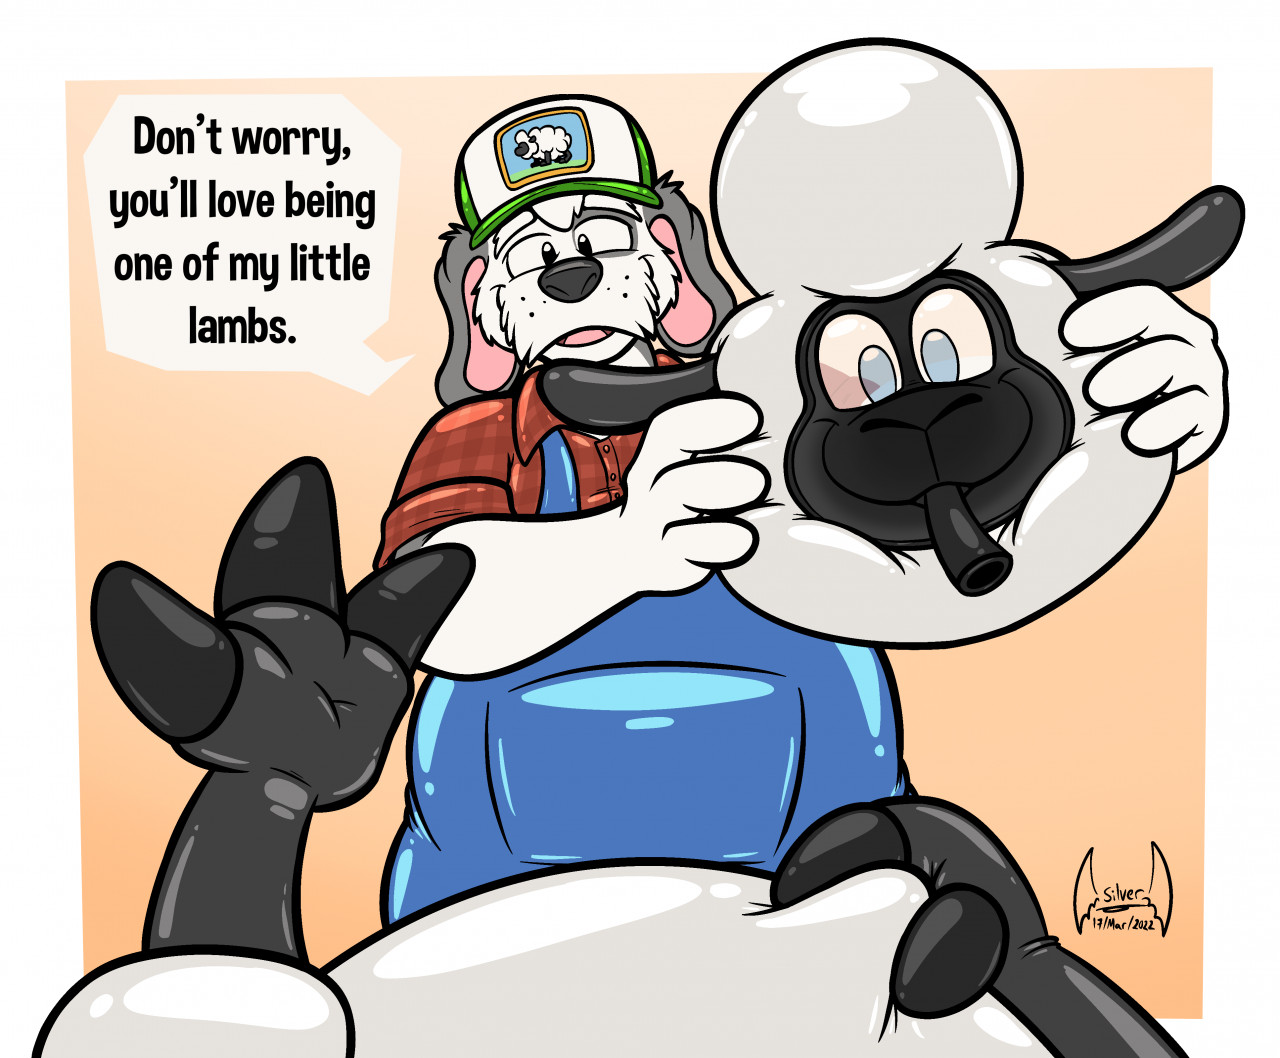 COM] Joining Barnaby's rubber sheep flock by soul-silver-dragon